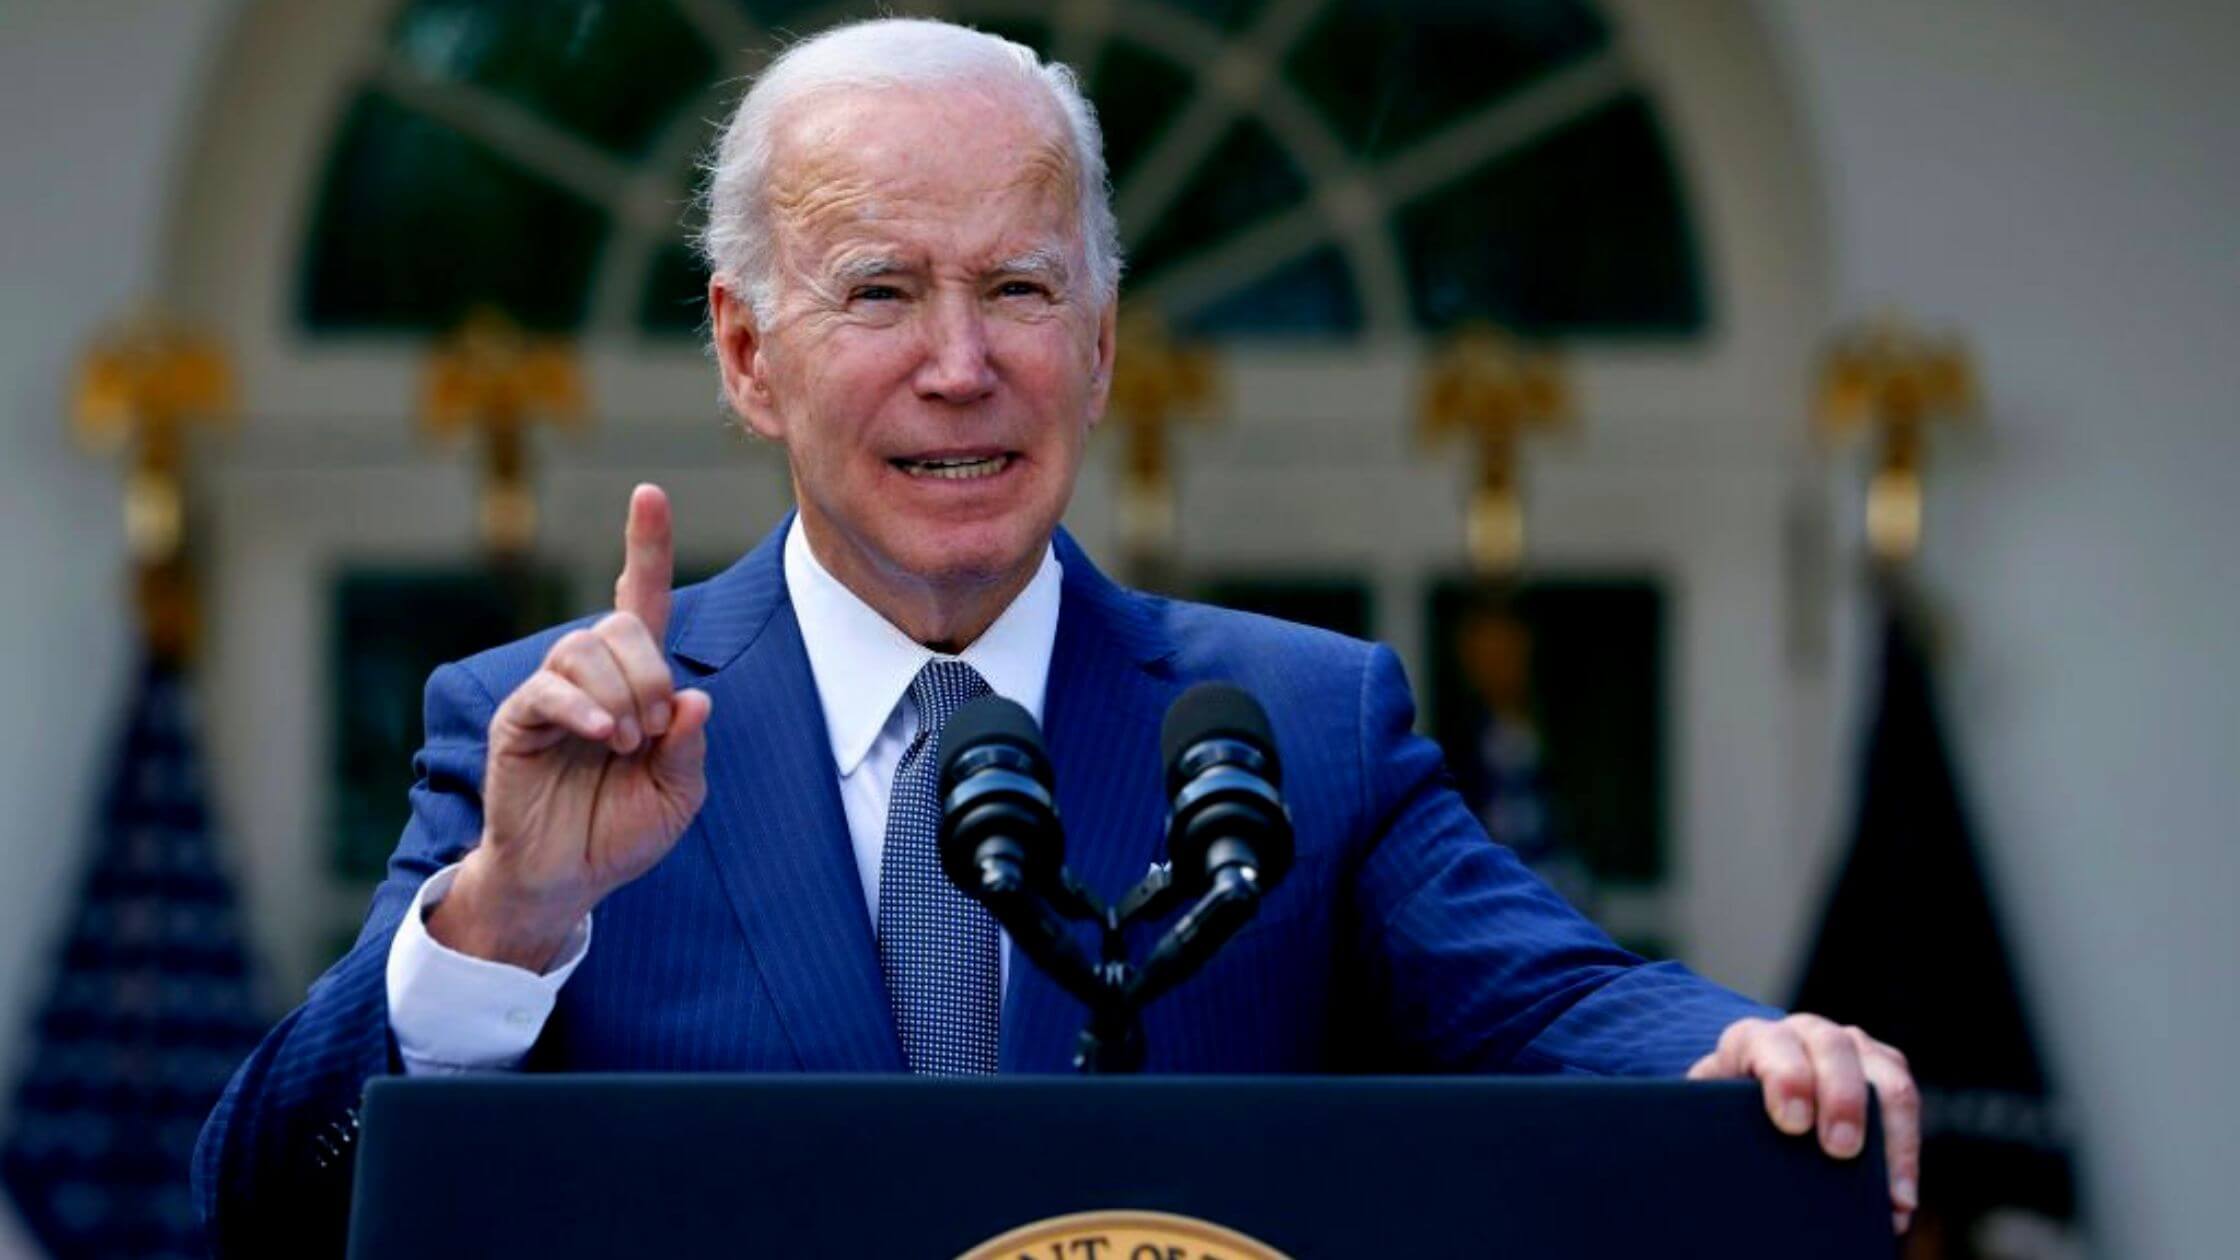 Biden Portrays The Midterm Elections As A Defining Moment For American Democracy